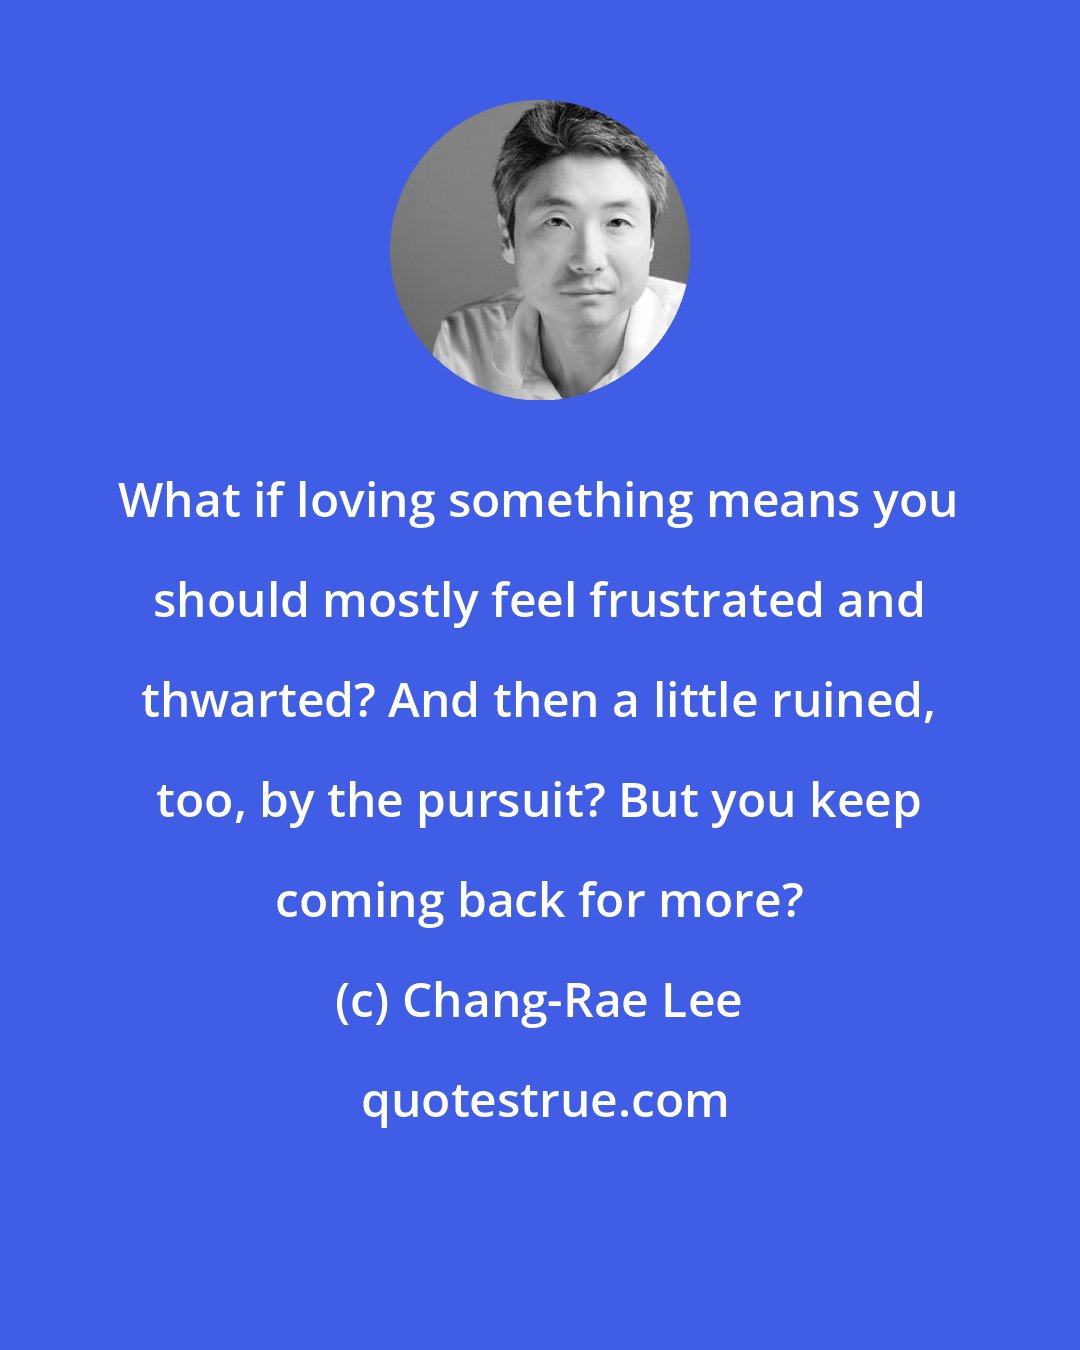 Chang-Rae Lee: What if loving something means you should mostly feel frustrated and thwarted? And then a little ruined, too, by the pursuit? But you keep coming back for more?